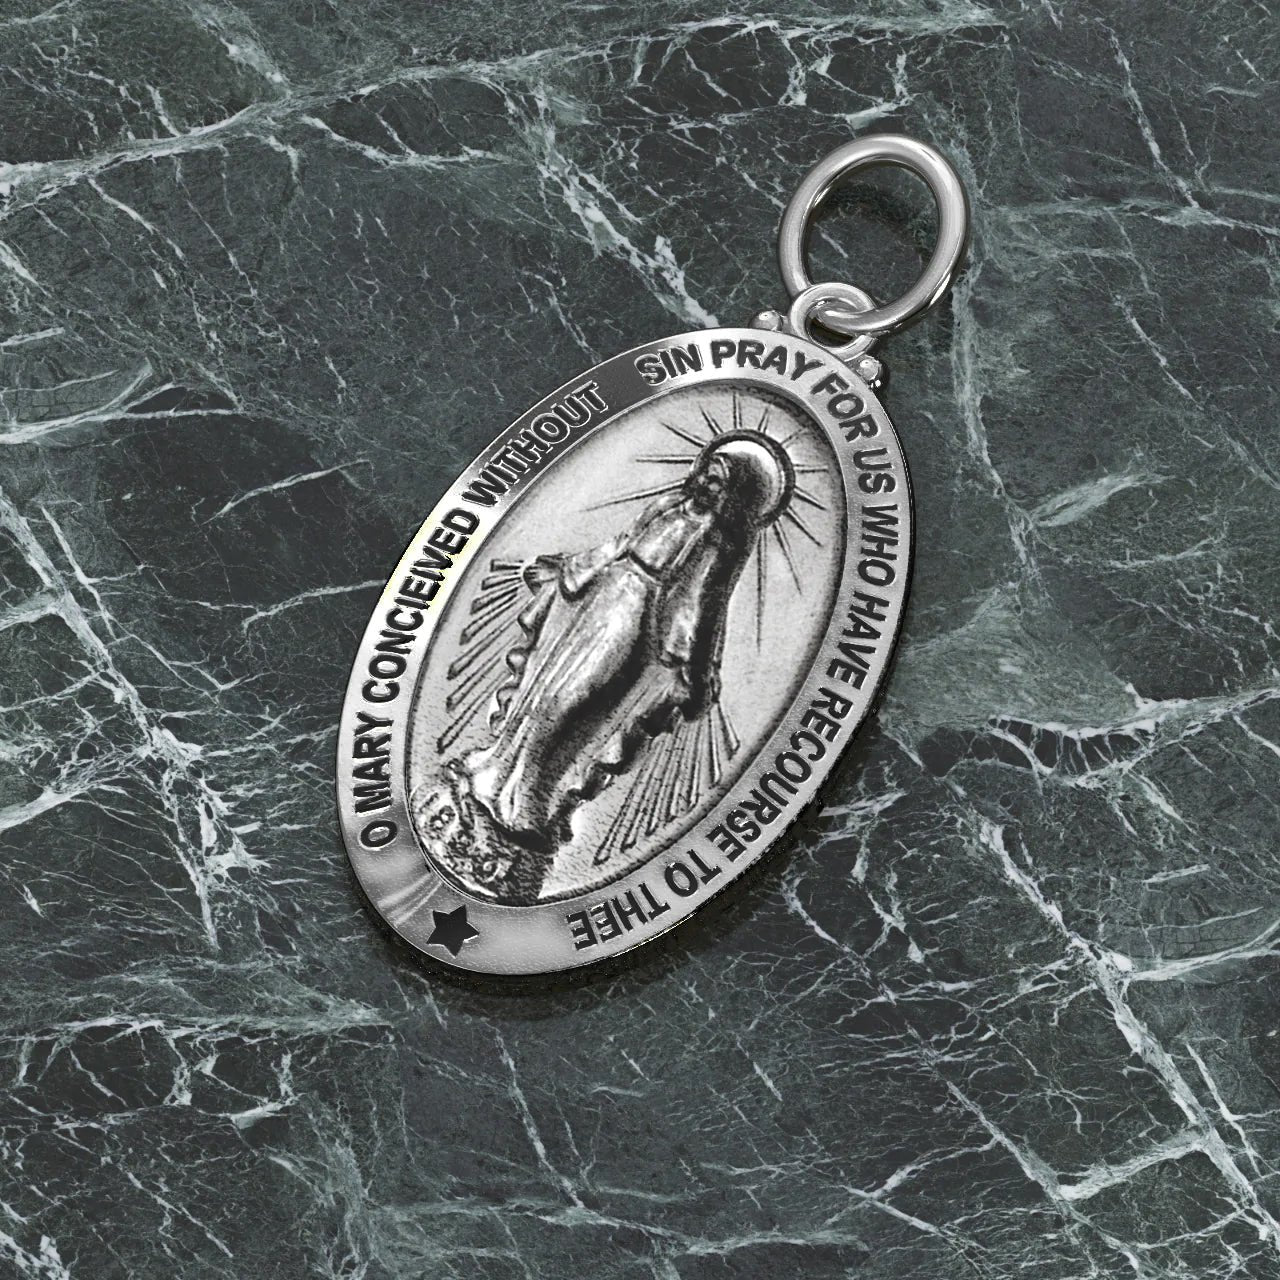 Ladies 925 Sterling Silver Large Miraculous Virgin Mary Antiqued Pendant Necklace, 32mm - US Jewels